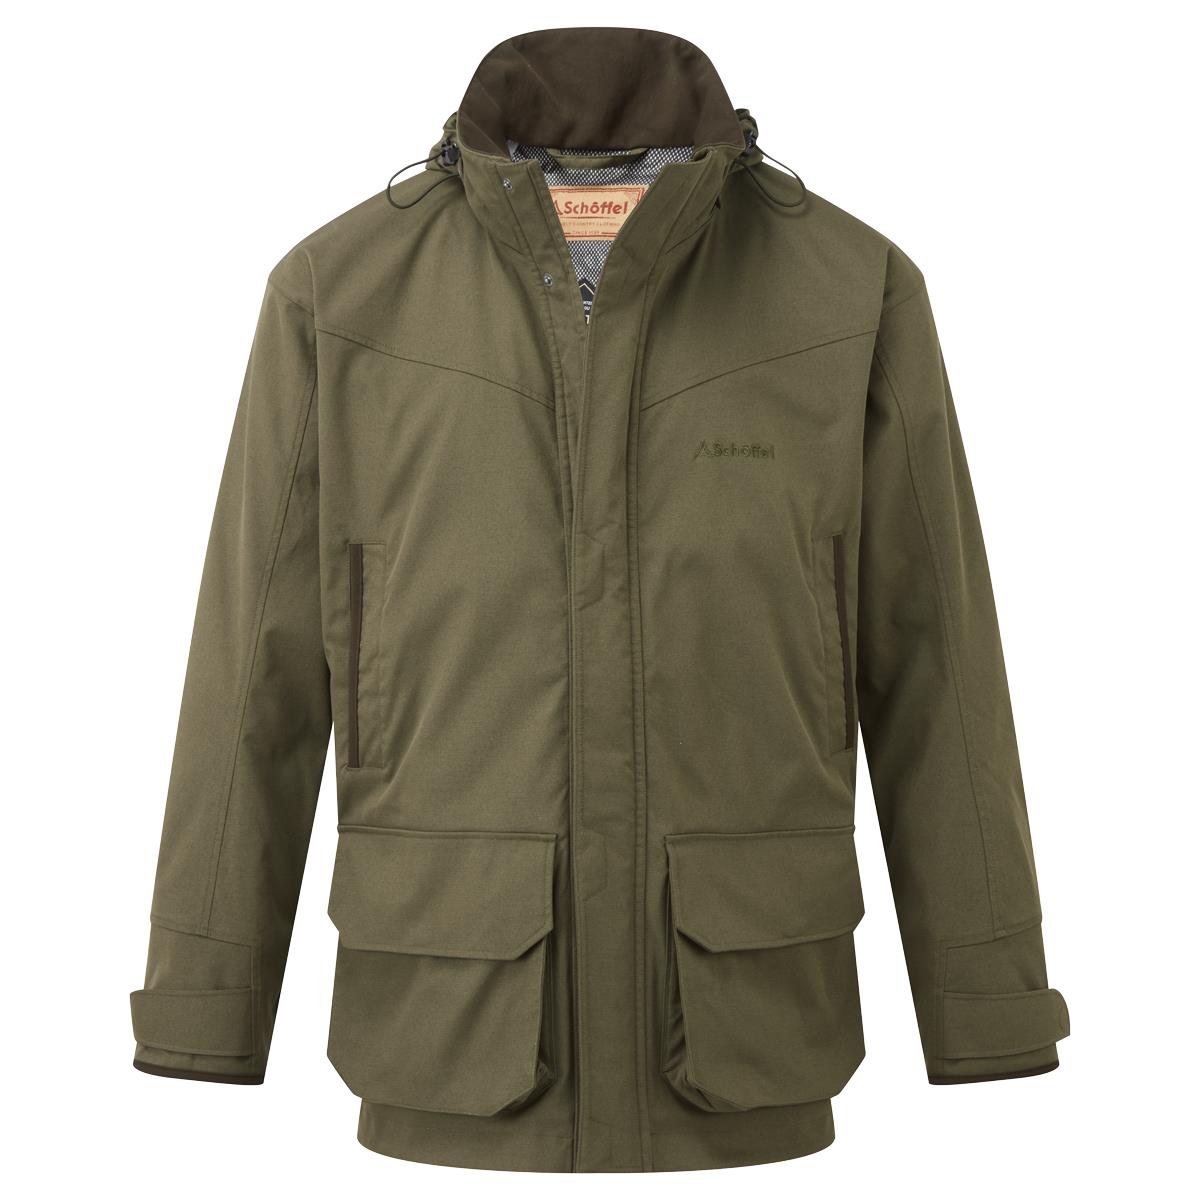 Given my 48-inch chest, should I size up to 50 for the Schoffel Ptarmigan Evo Coat?